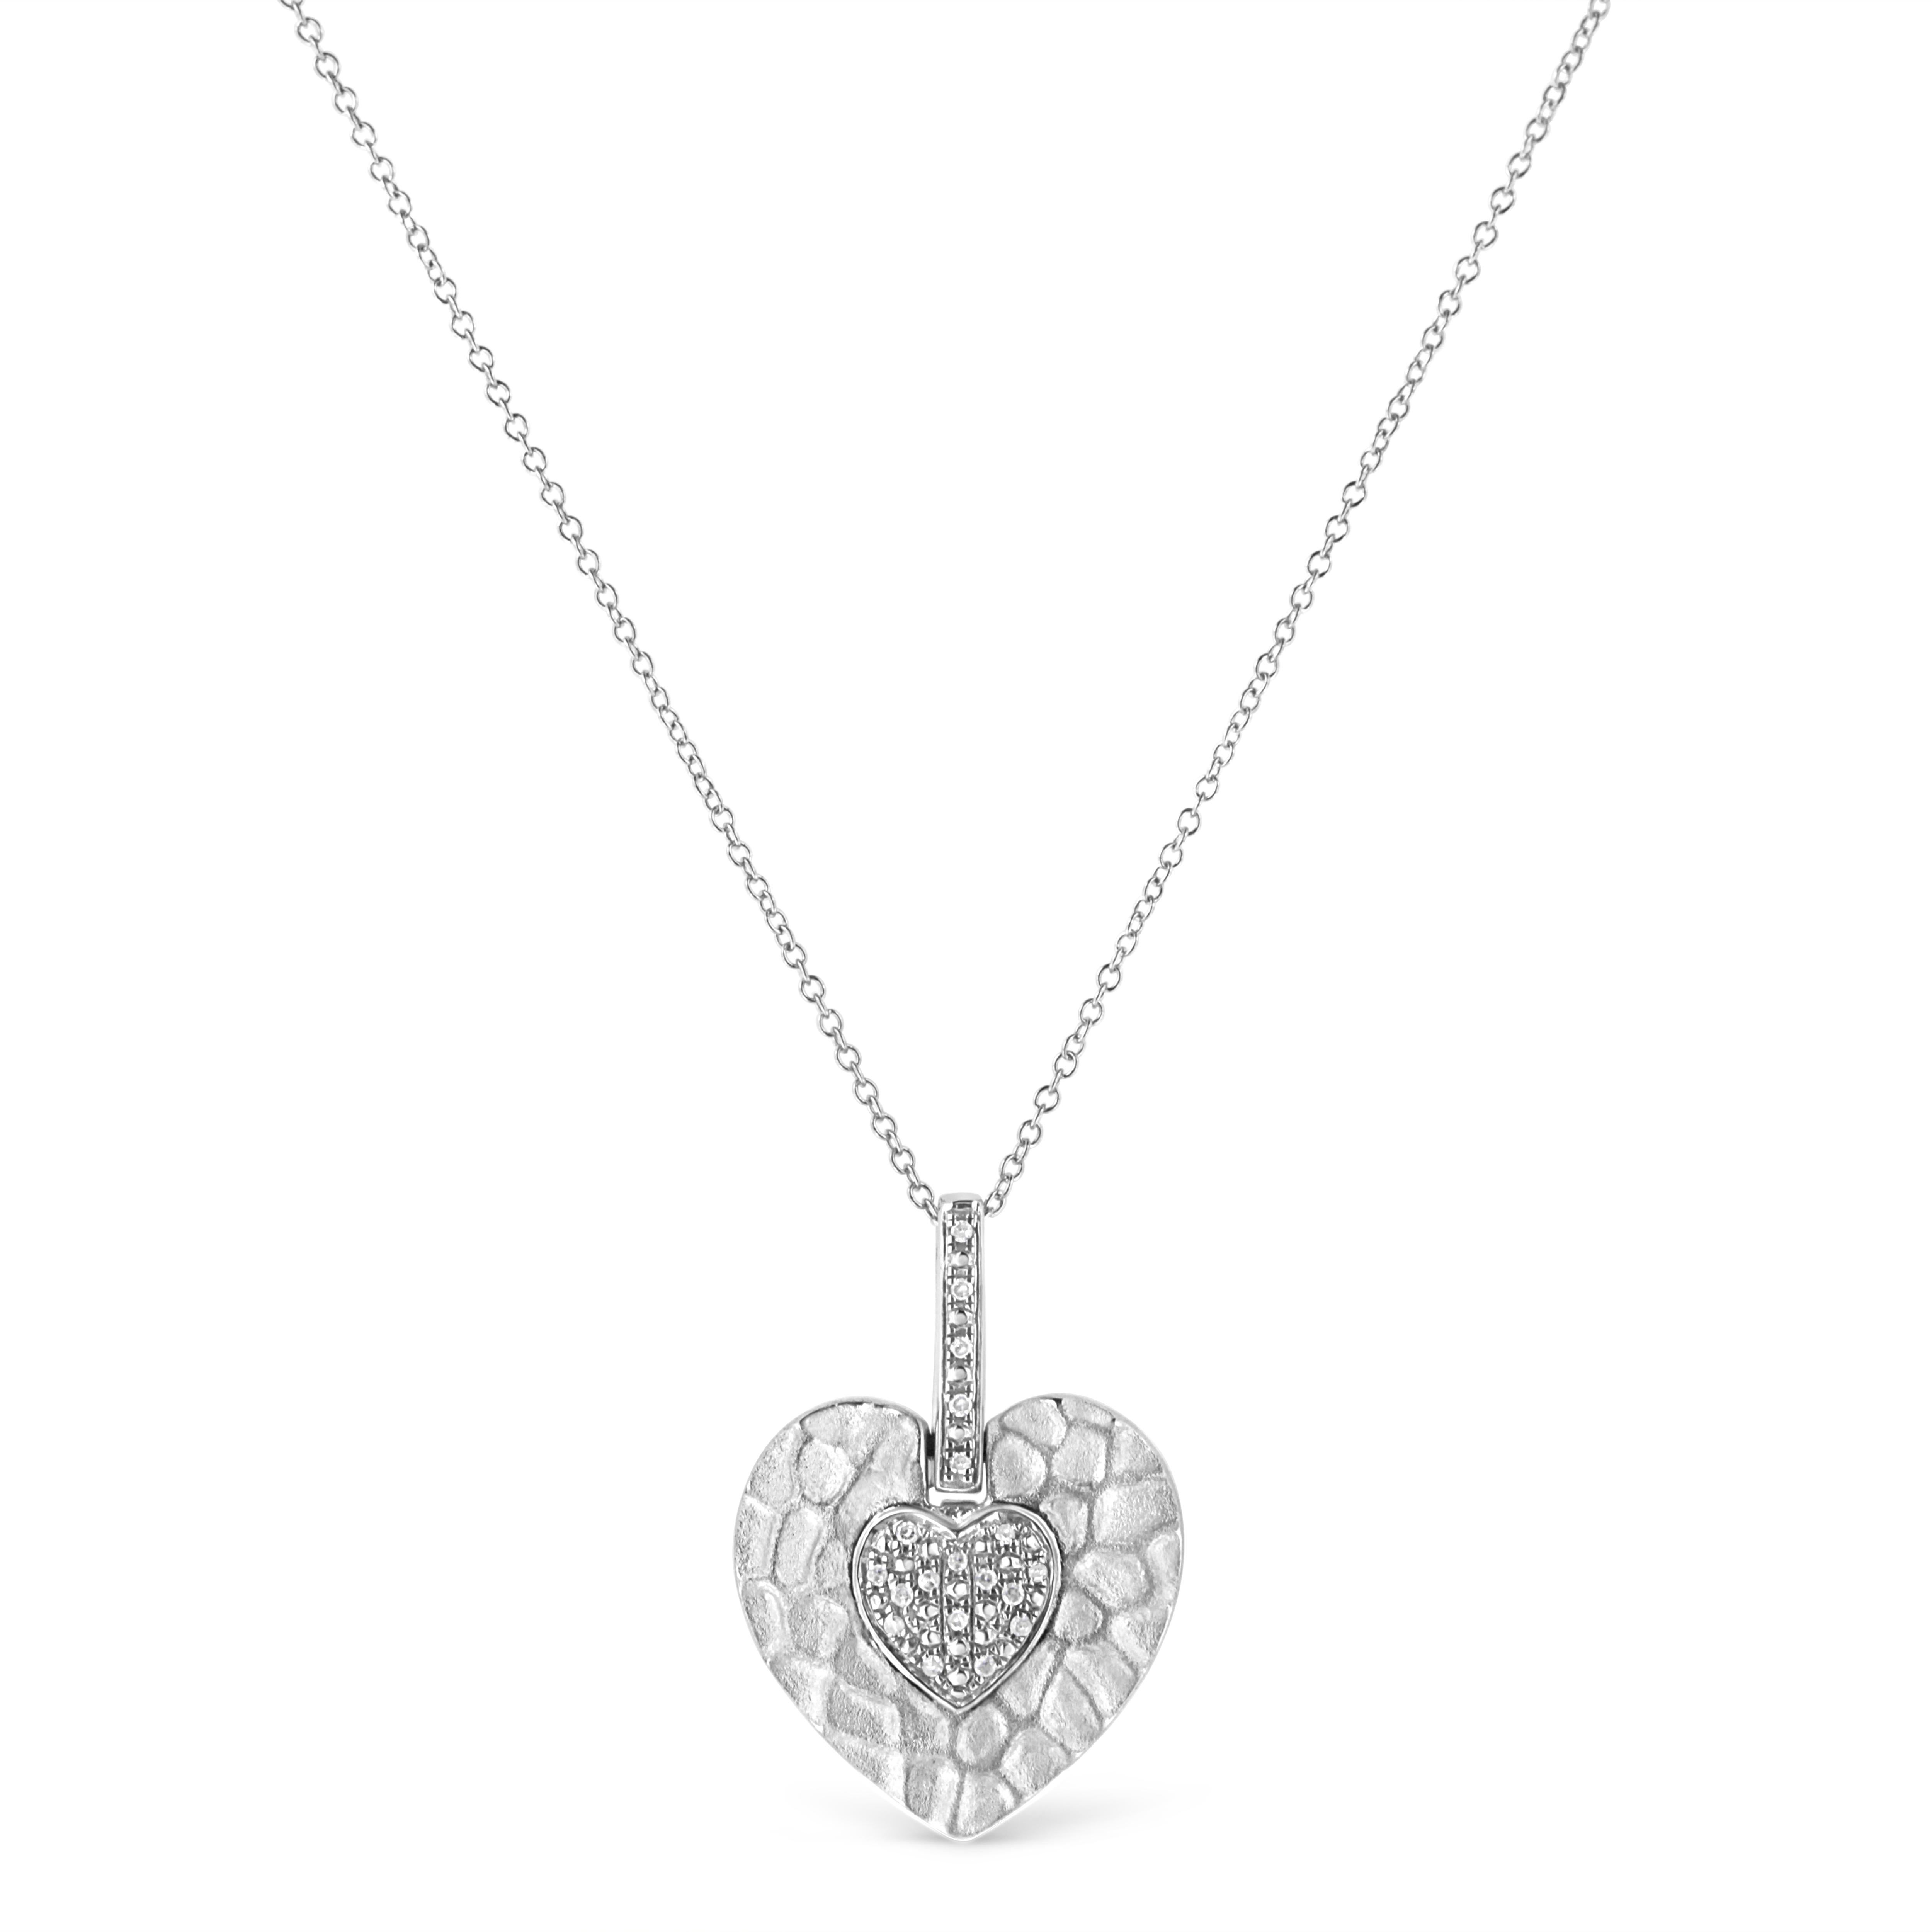 Express the expression of love for her with this stunning Diamond pendant. Styled in 925 sterling silver this pendant showcase 20 pave set single cut diamonds that form a small heart inside of a large pre-designed heart. The pendant hangs from a